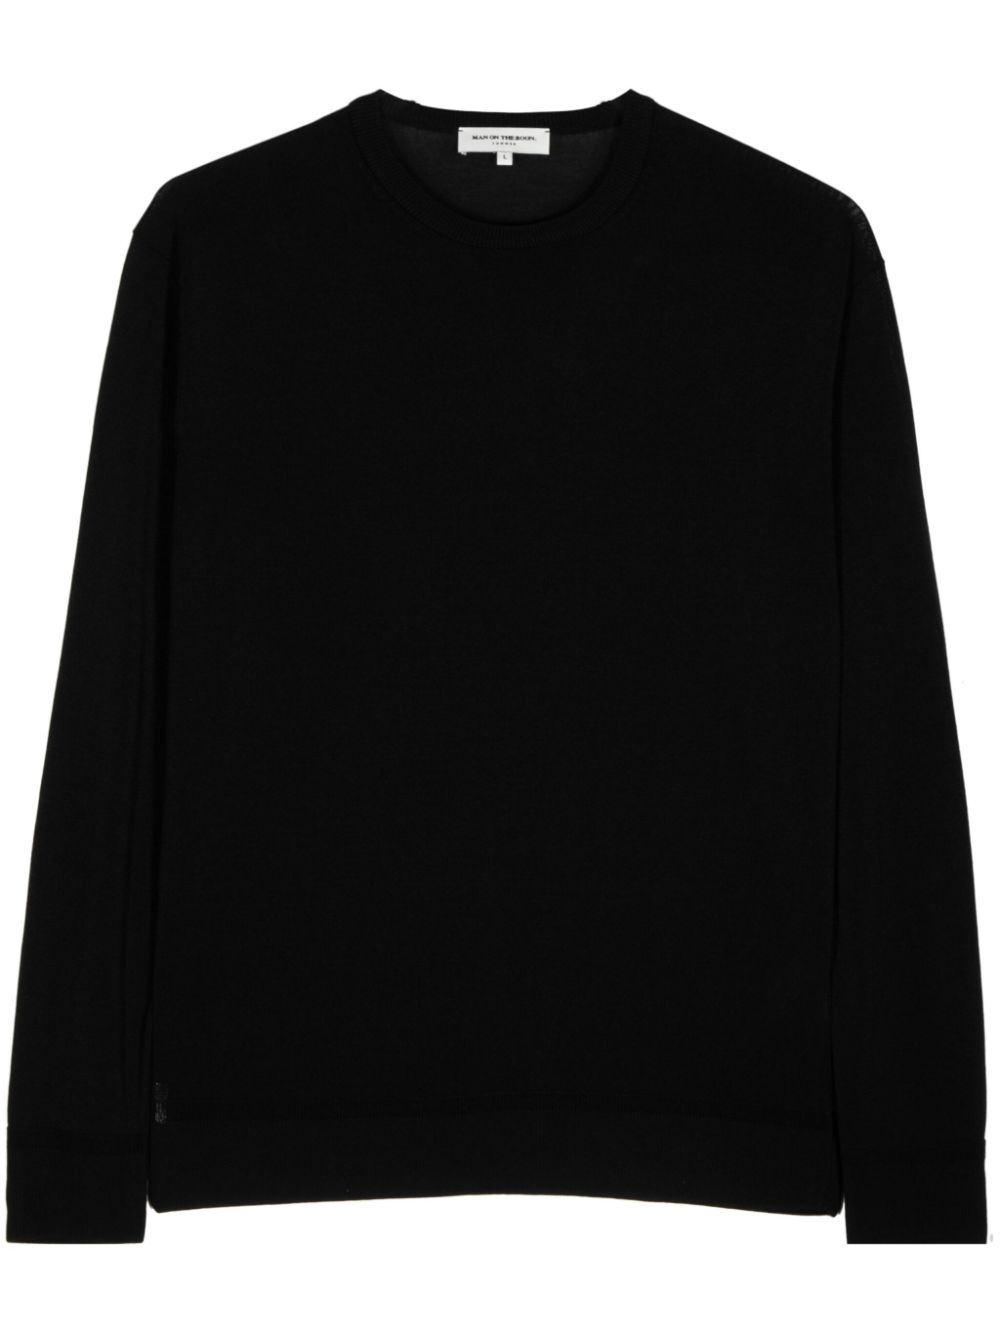 Man On The Boon. Cotton Sweater In Black